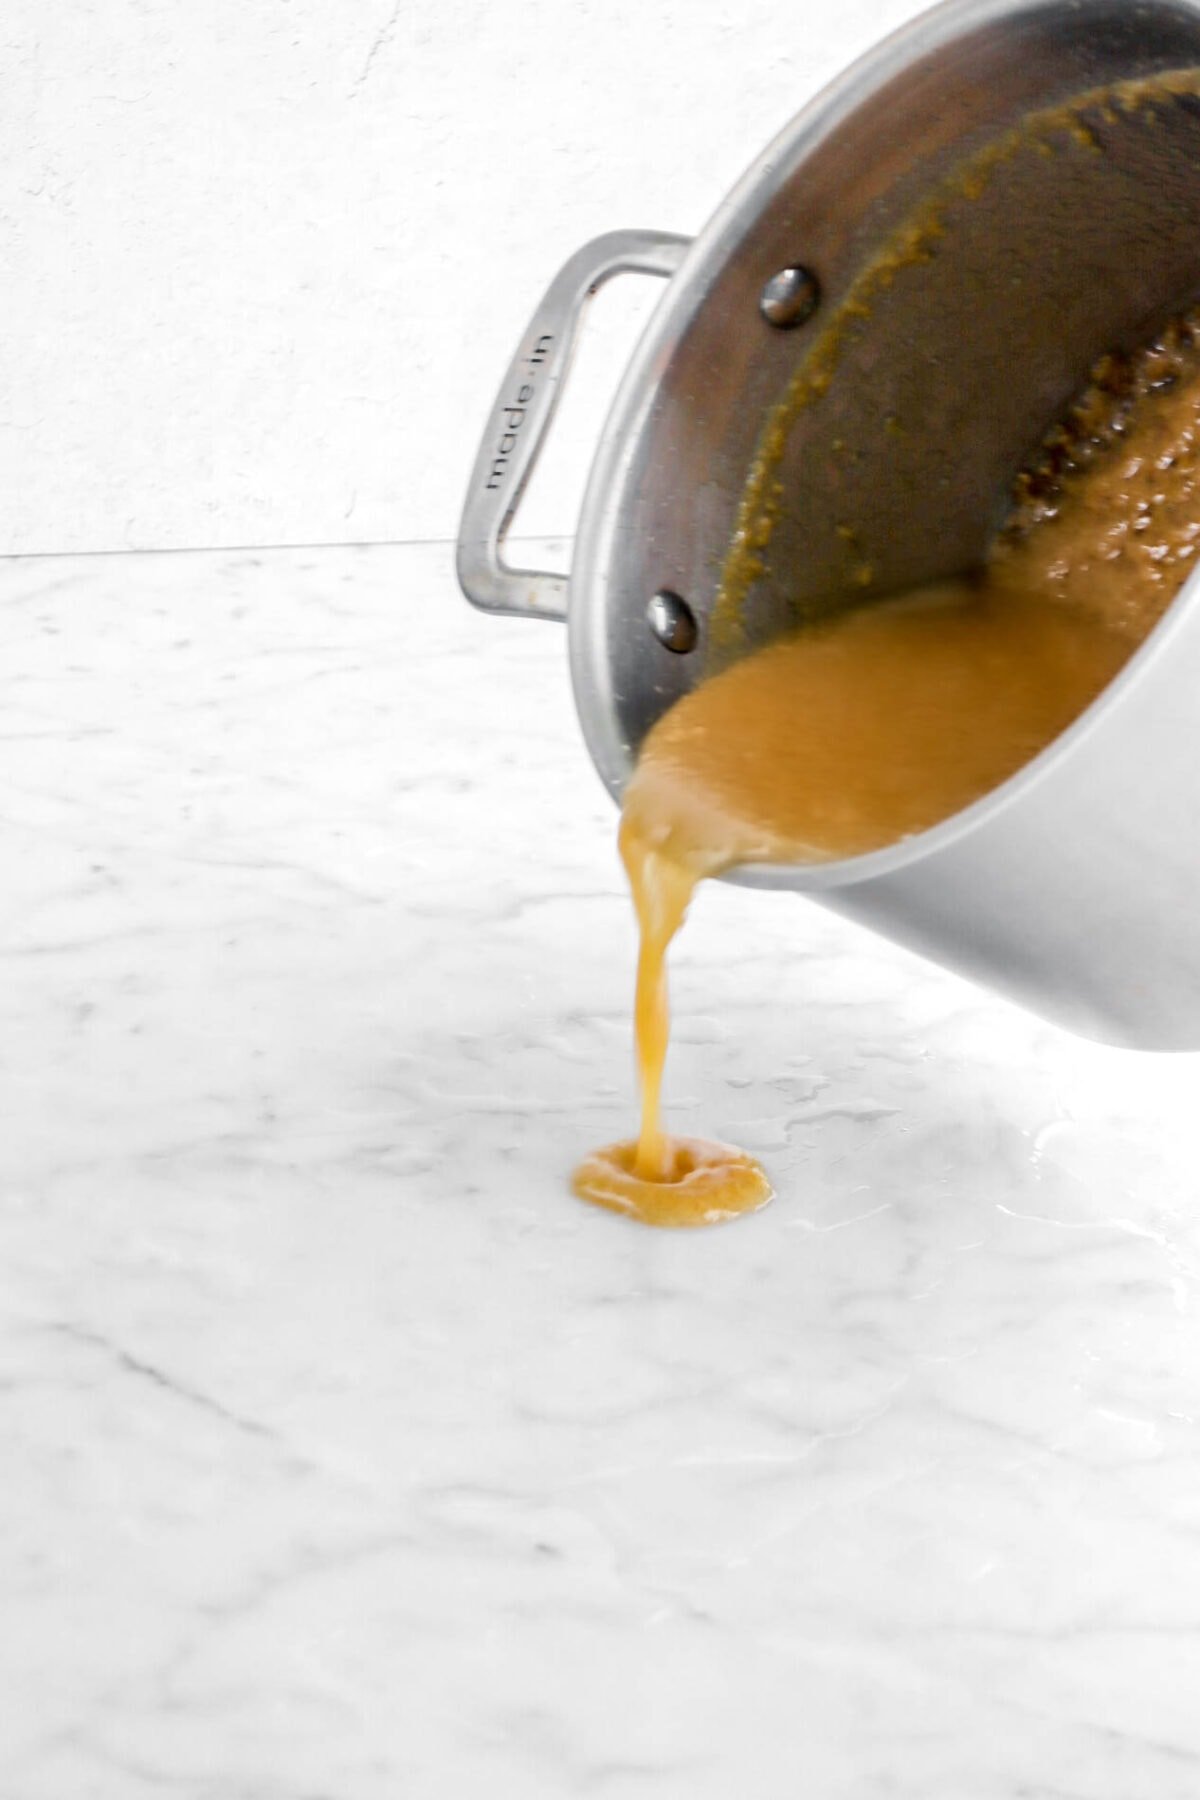 caramel being poured onto wet marble counter.